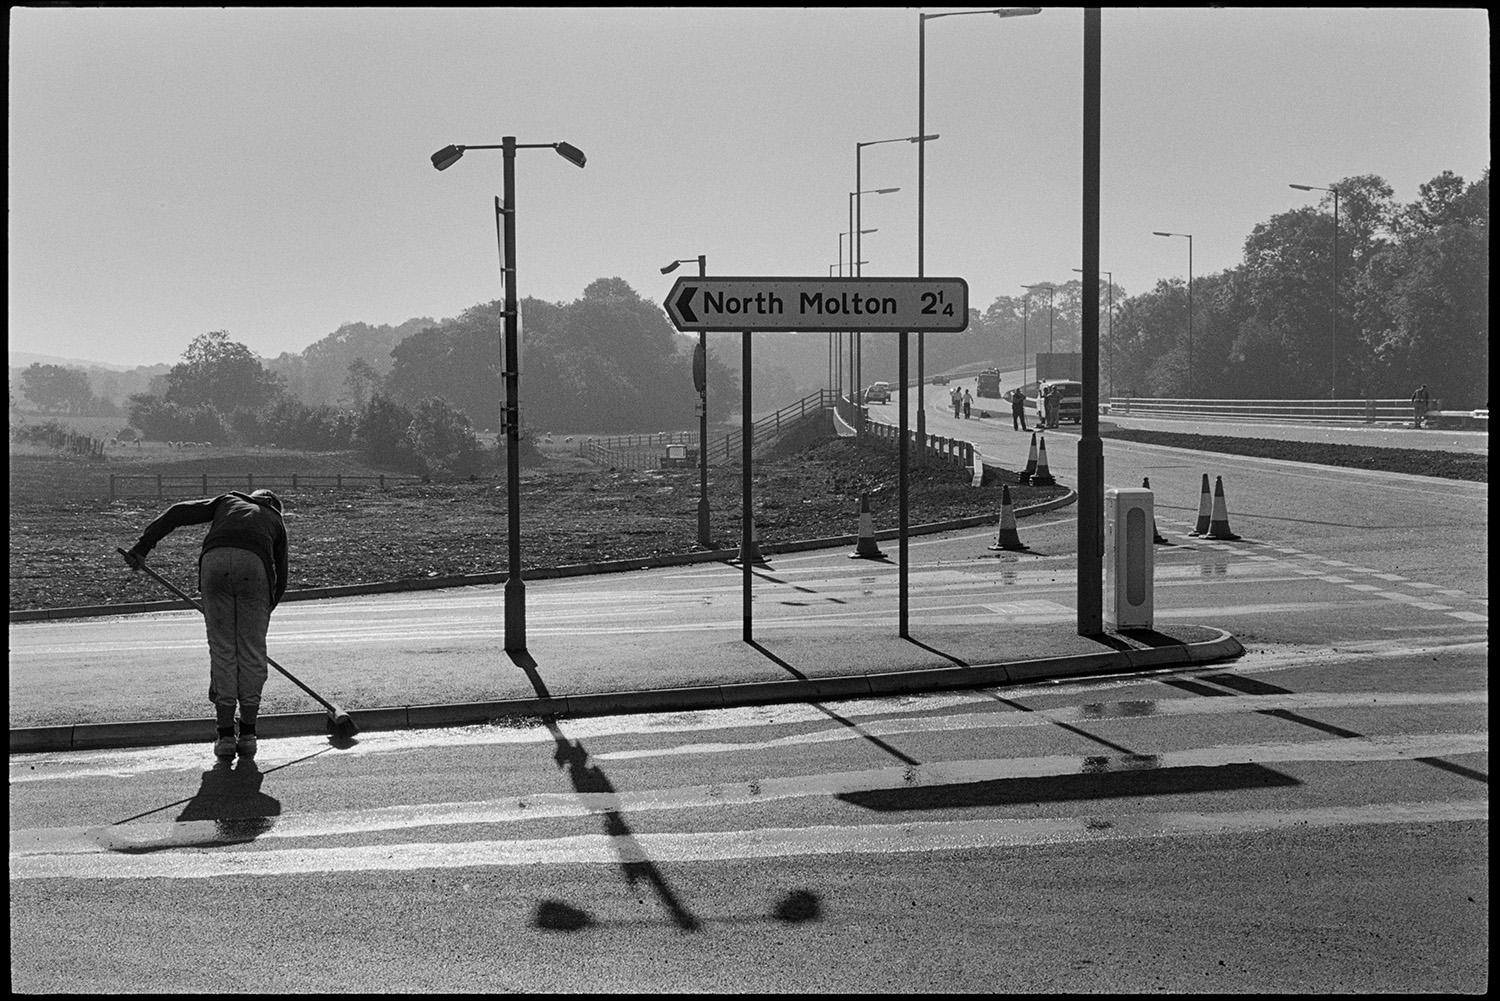 Men clearing new link road before official opening.
[Man sweeping the road at the junction of the North Molton Road and the A361 North Devon Link Road near South Molton, before the official opening of the road. In the background other workers and vehicles can be seen on the road.]